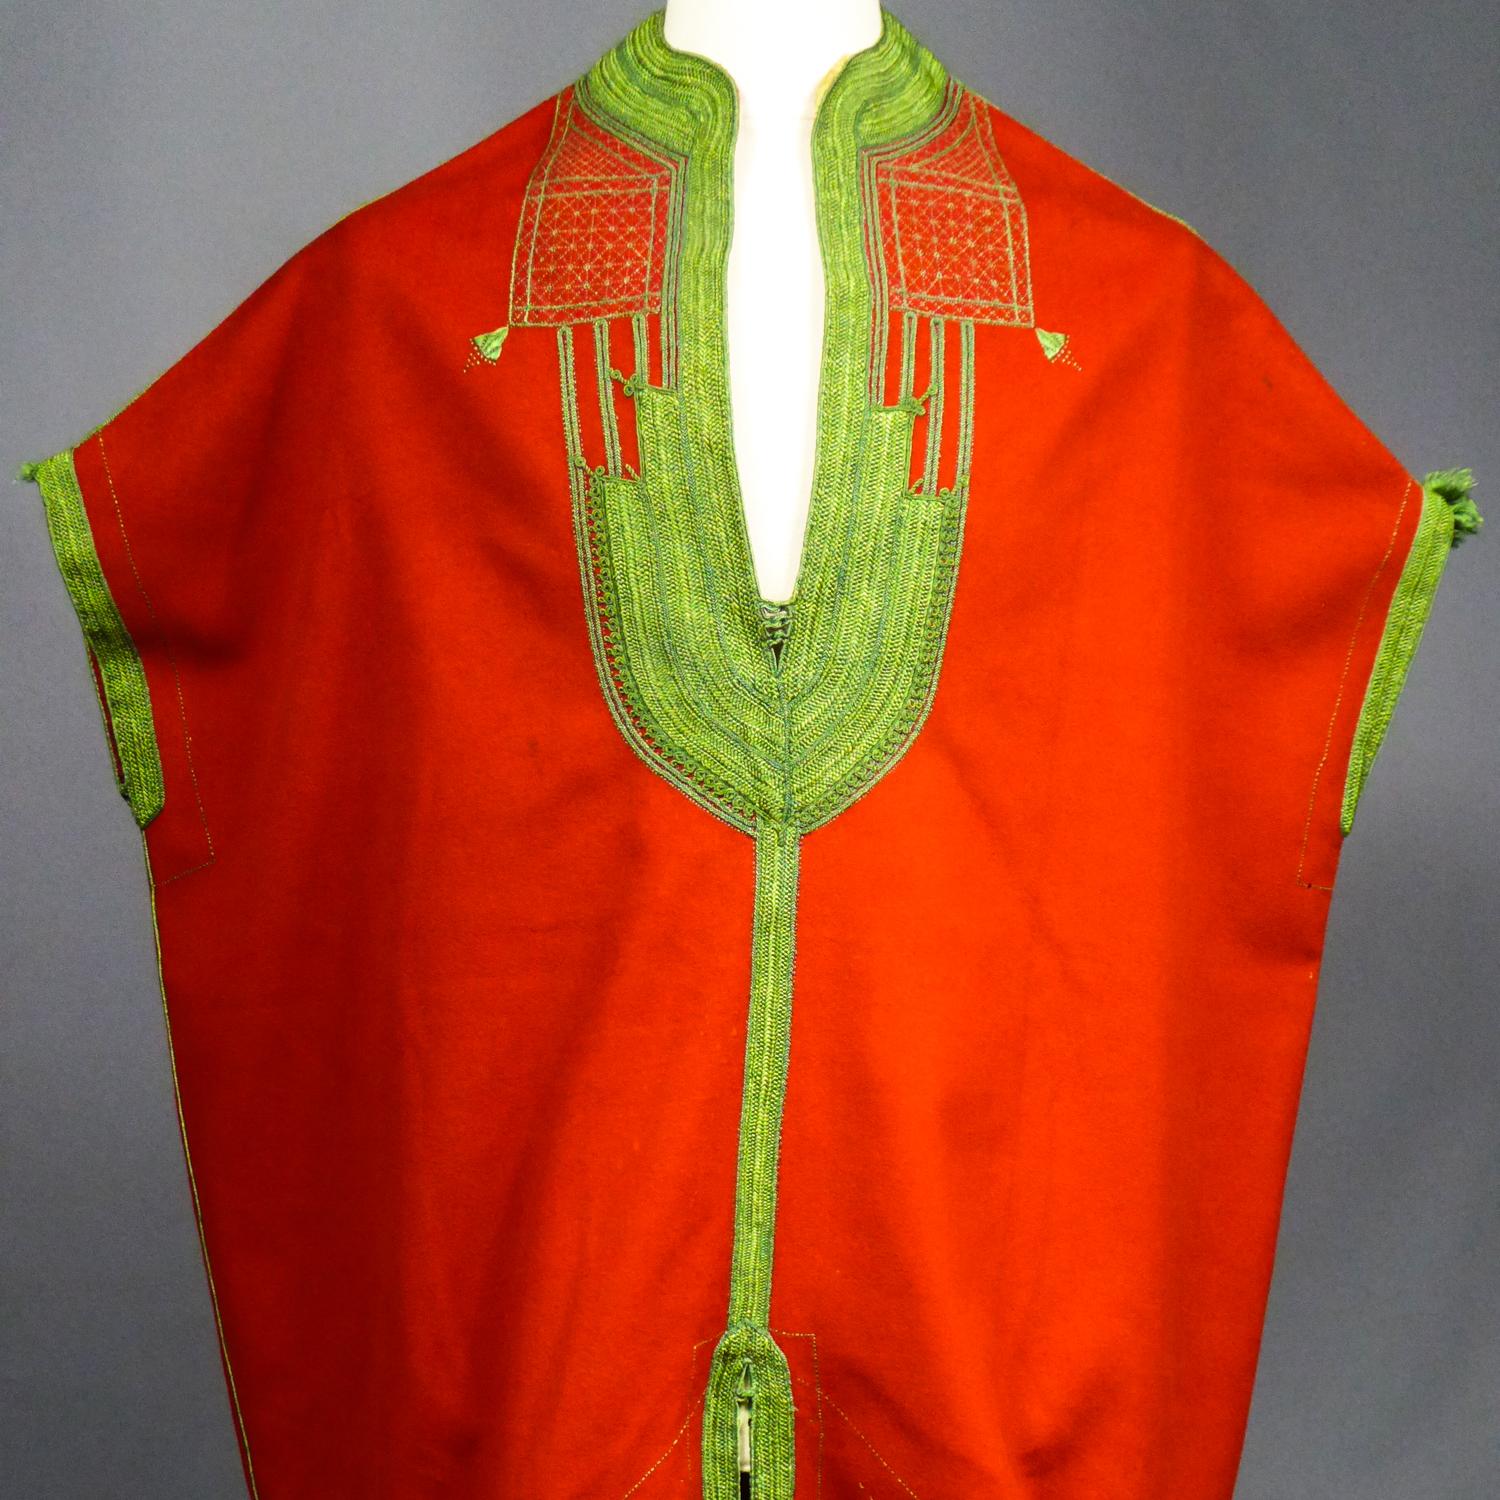 Circa 1900/1920
Tunisia

Spectacular ceremonial tunic in adult size or festive Tunisian Jebba for circumcision dating from the first half of the 20th century. Very fine vermilion red wool felt embroidered with floss-silk with a yellow-green plant